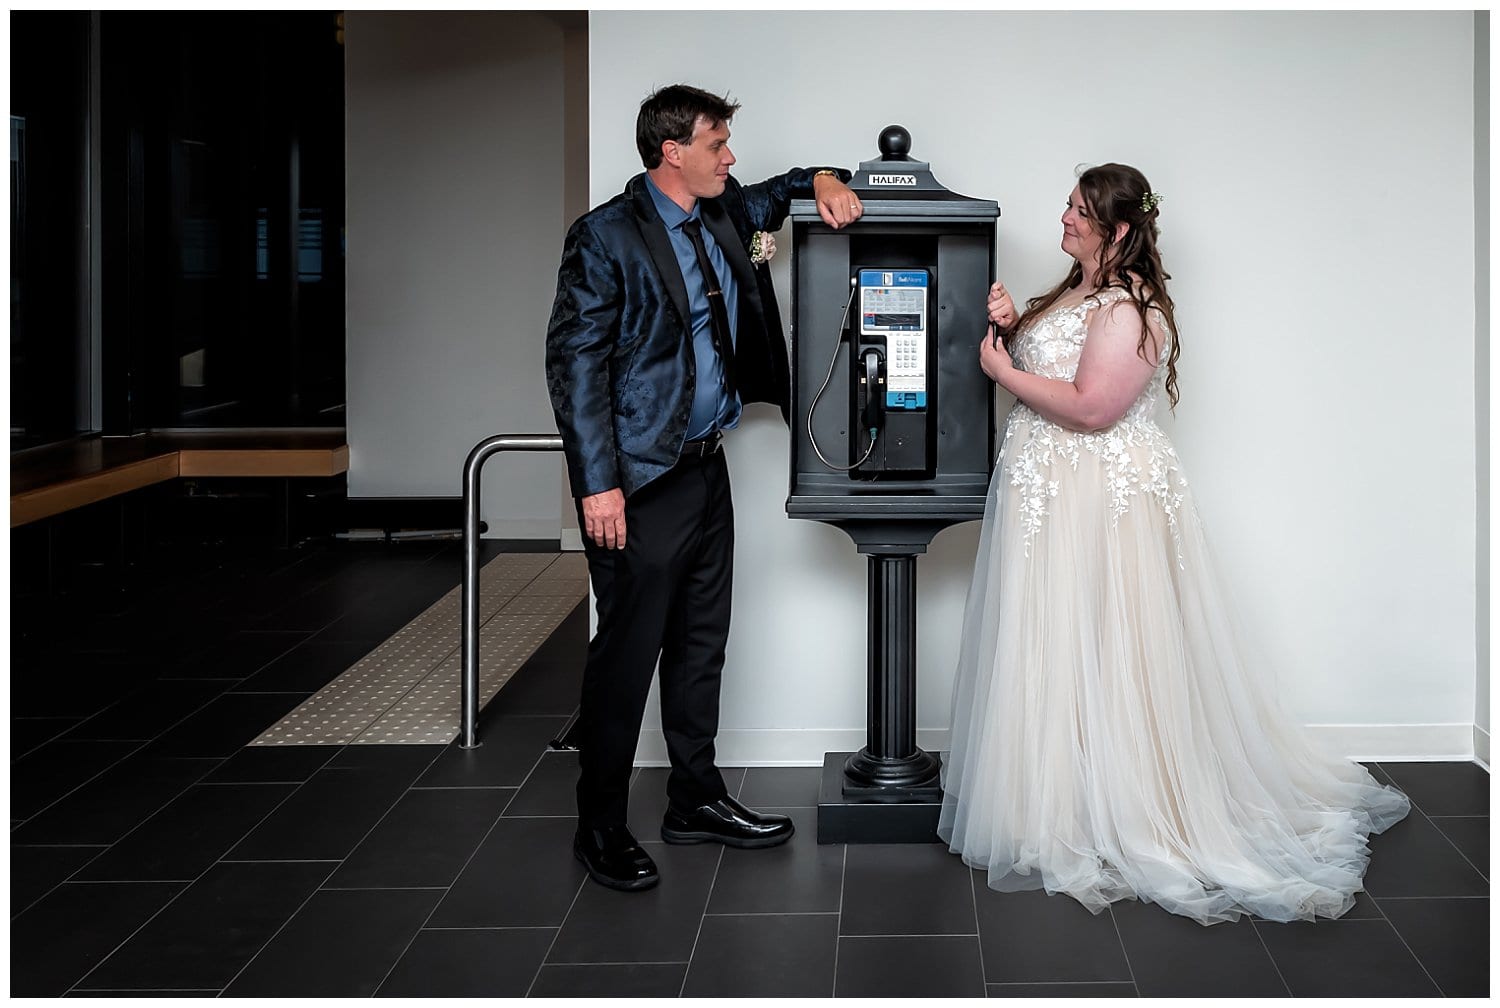 Bride and groom stare at each other over an old time phone booth at Alderney Gate in Dartmouth NS.